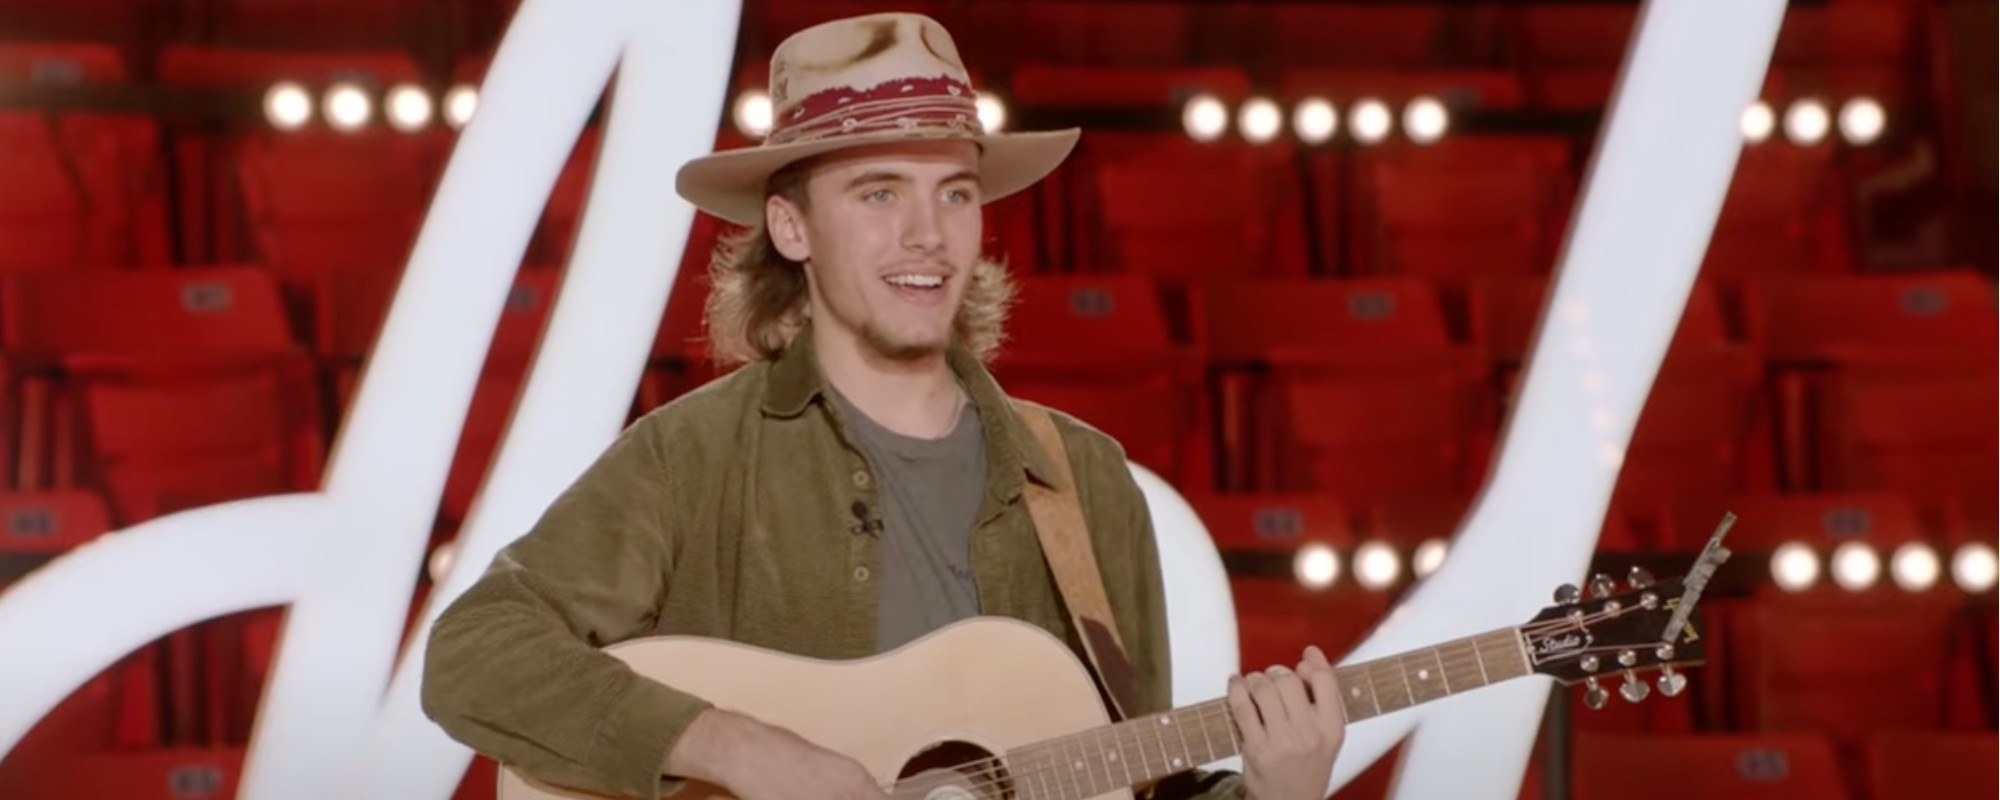 17-Year-Old Father & ‘American Idol’ Hopeful Gets Second Chance With Justin Moore Song—and Nails It